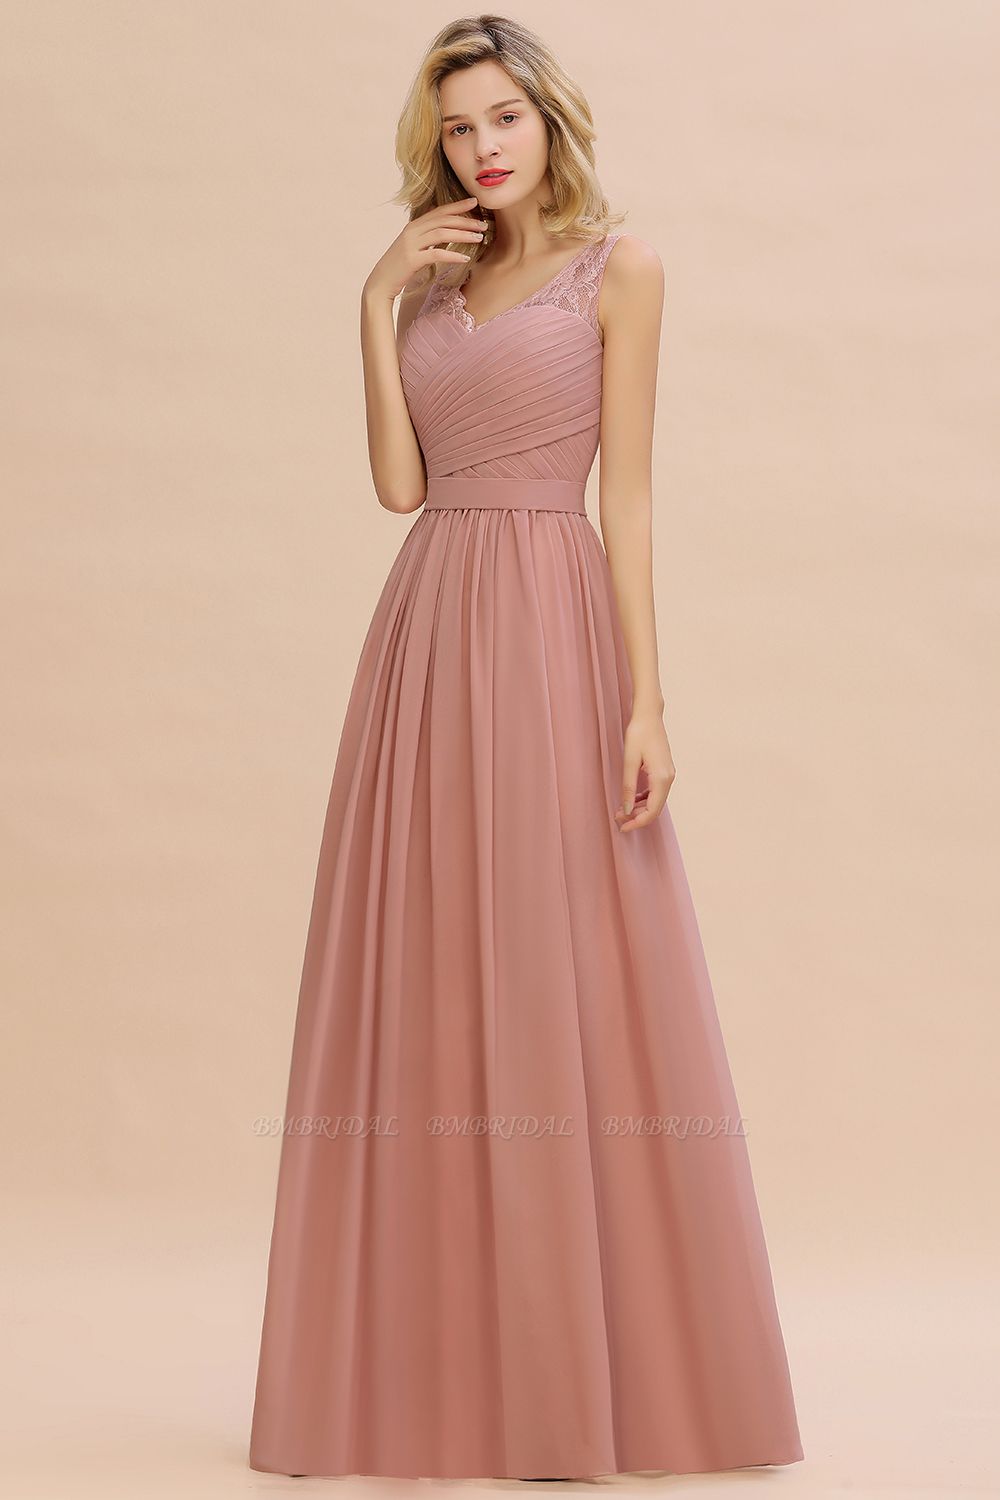 dusty rose gown